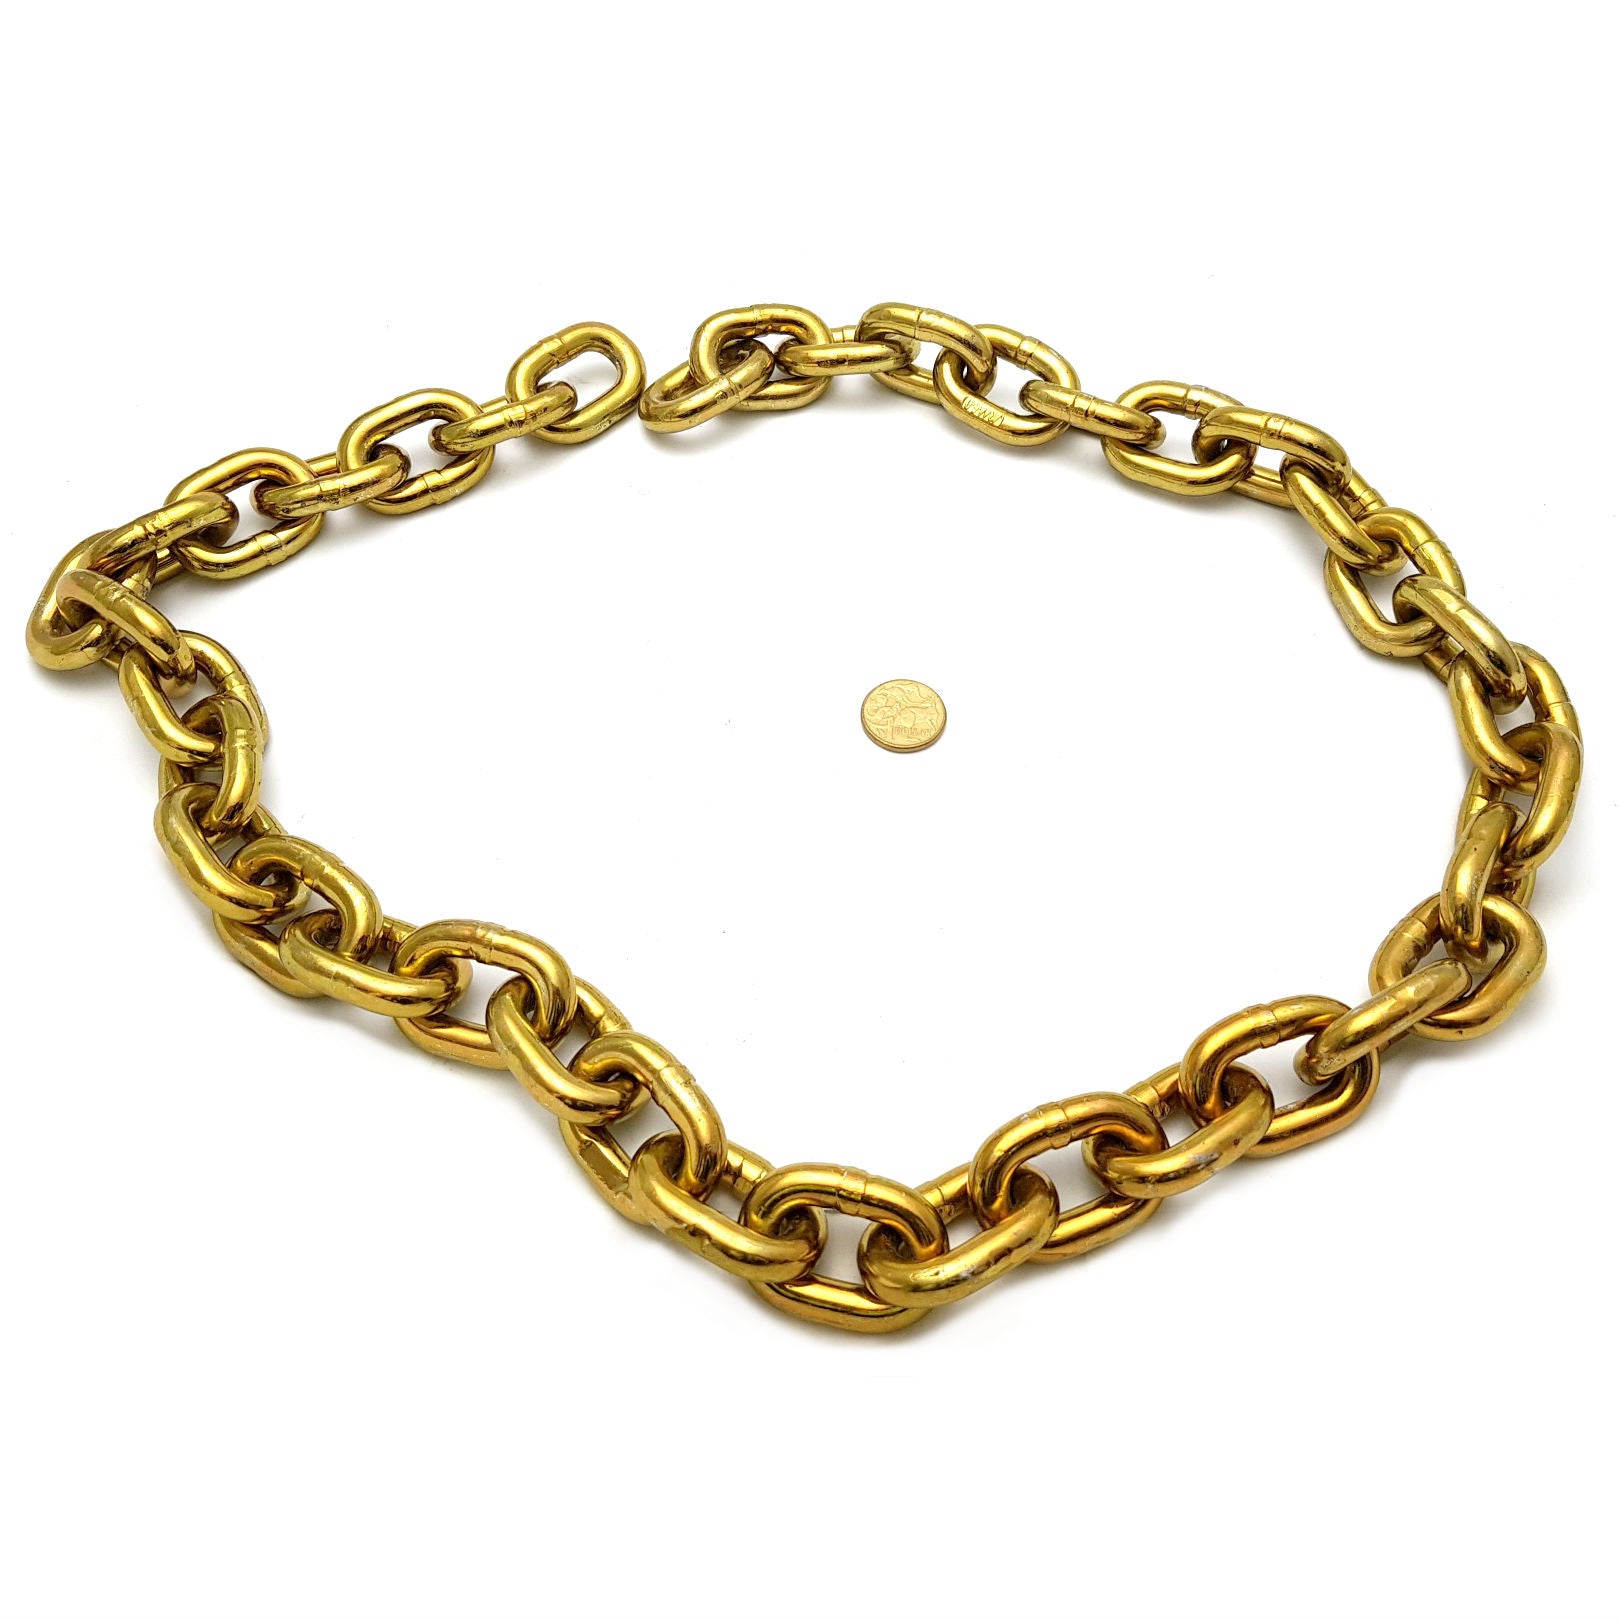 Hardened security chain, size: 10mm, order by the metre with a minimum order of 1 metre.